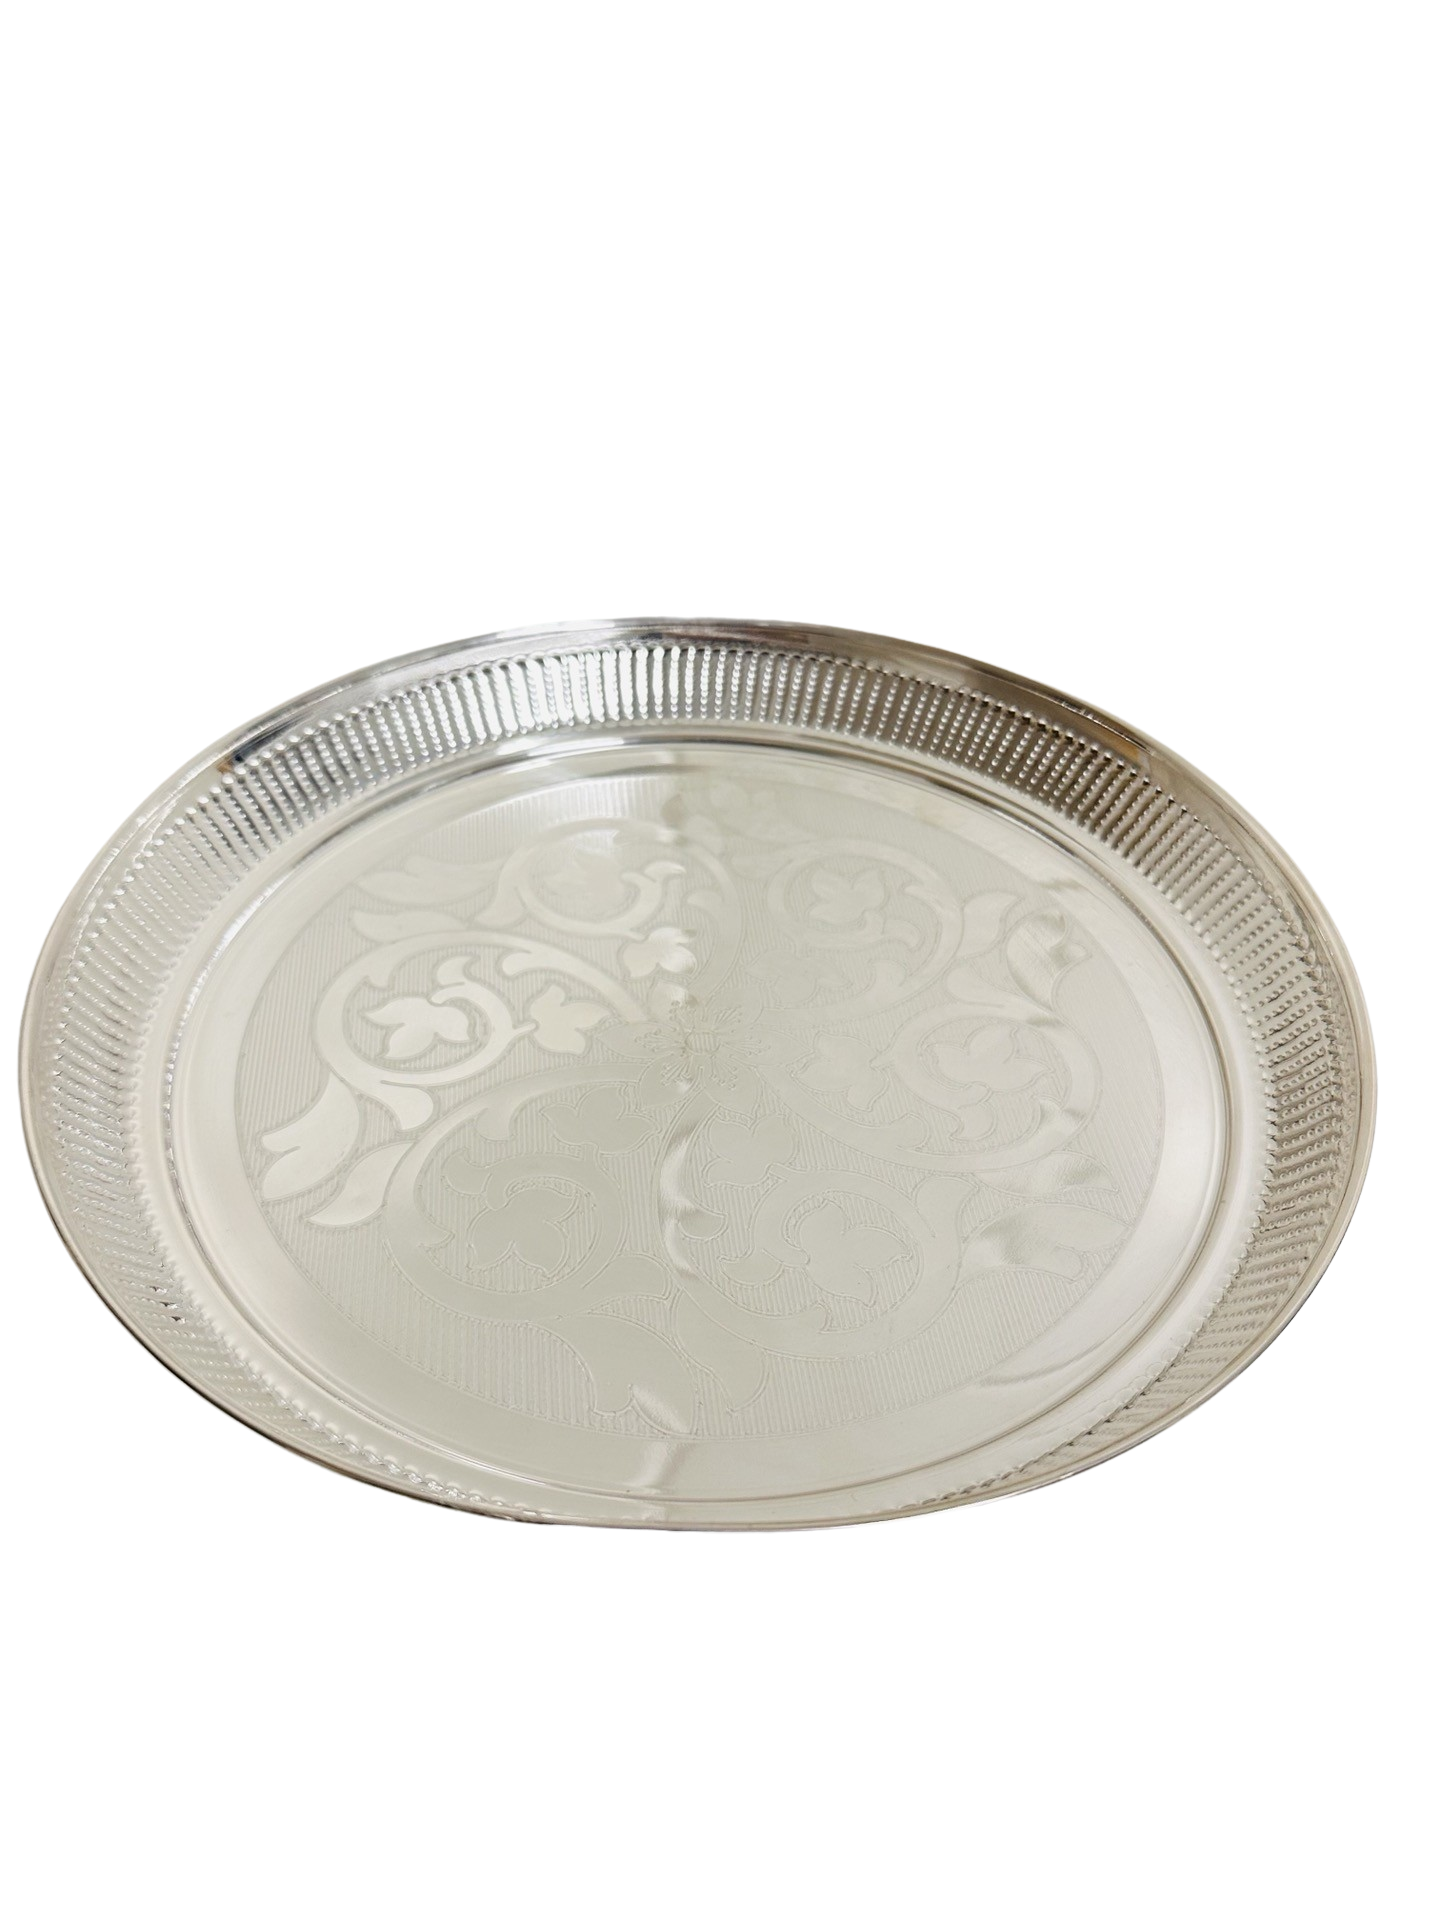 925 Silver Engraved Plate 8.8 inches